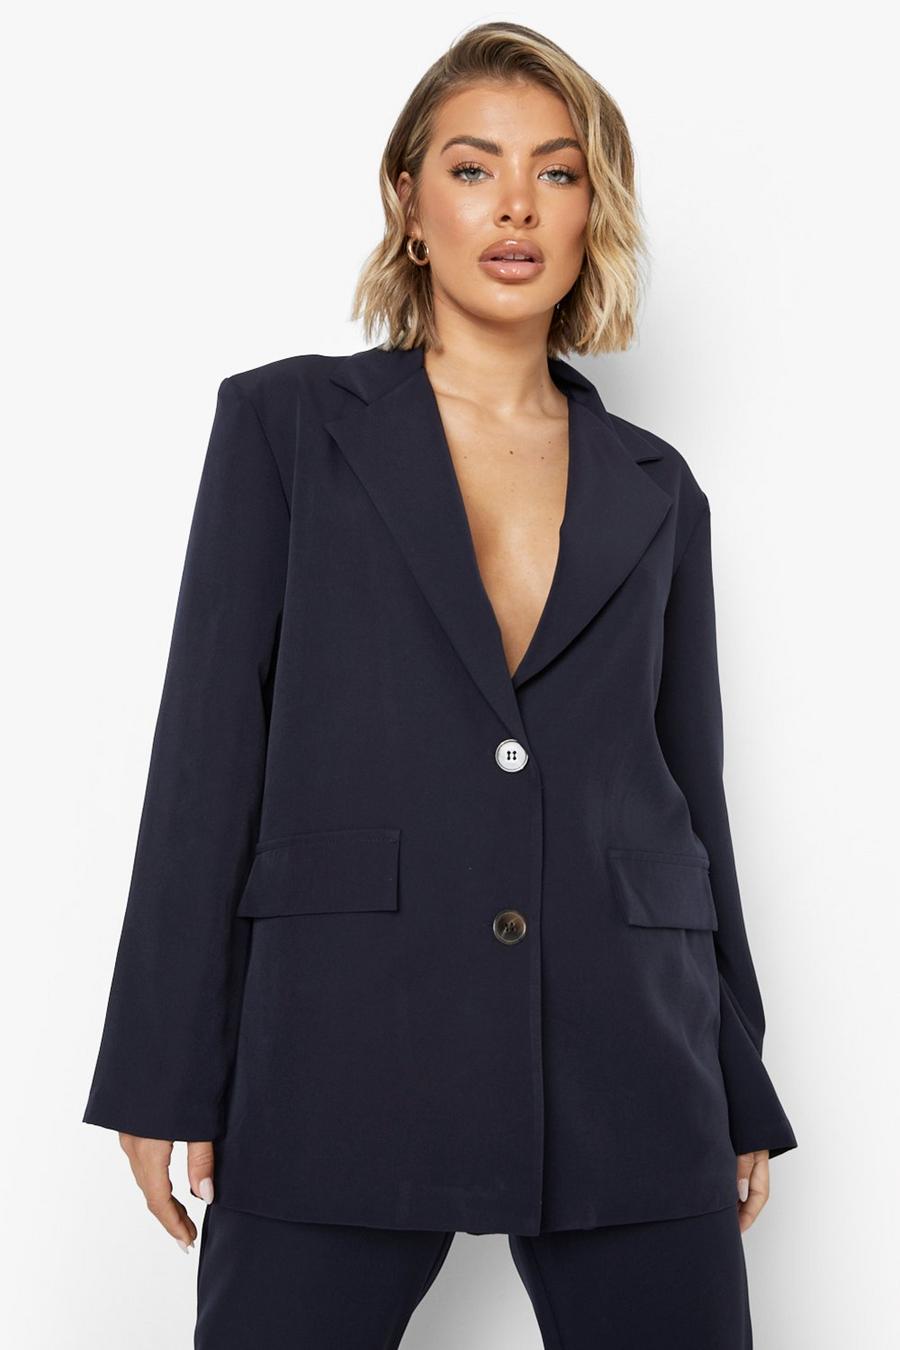 Boohoo Synthetic Relaxed Single Breasted Suit Jacket in Black Womens Mens Clothing Mens Jackets Blazers 